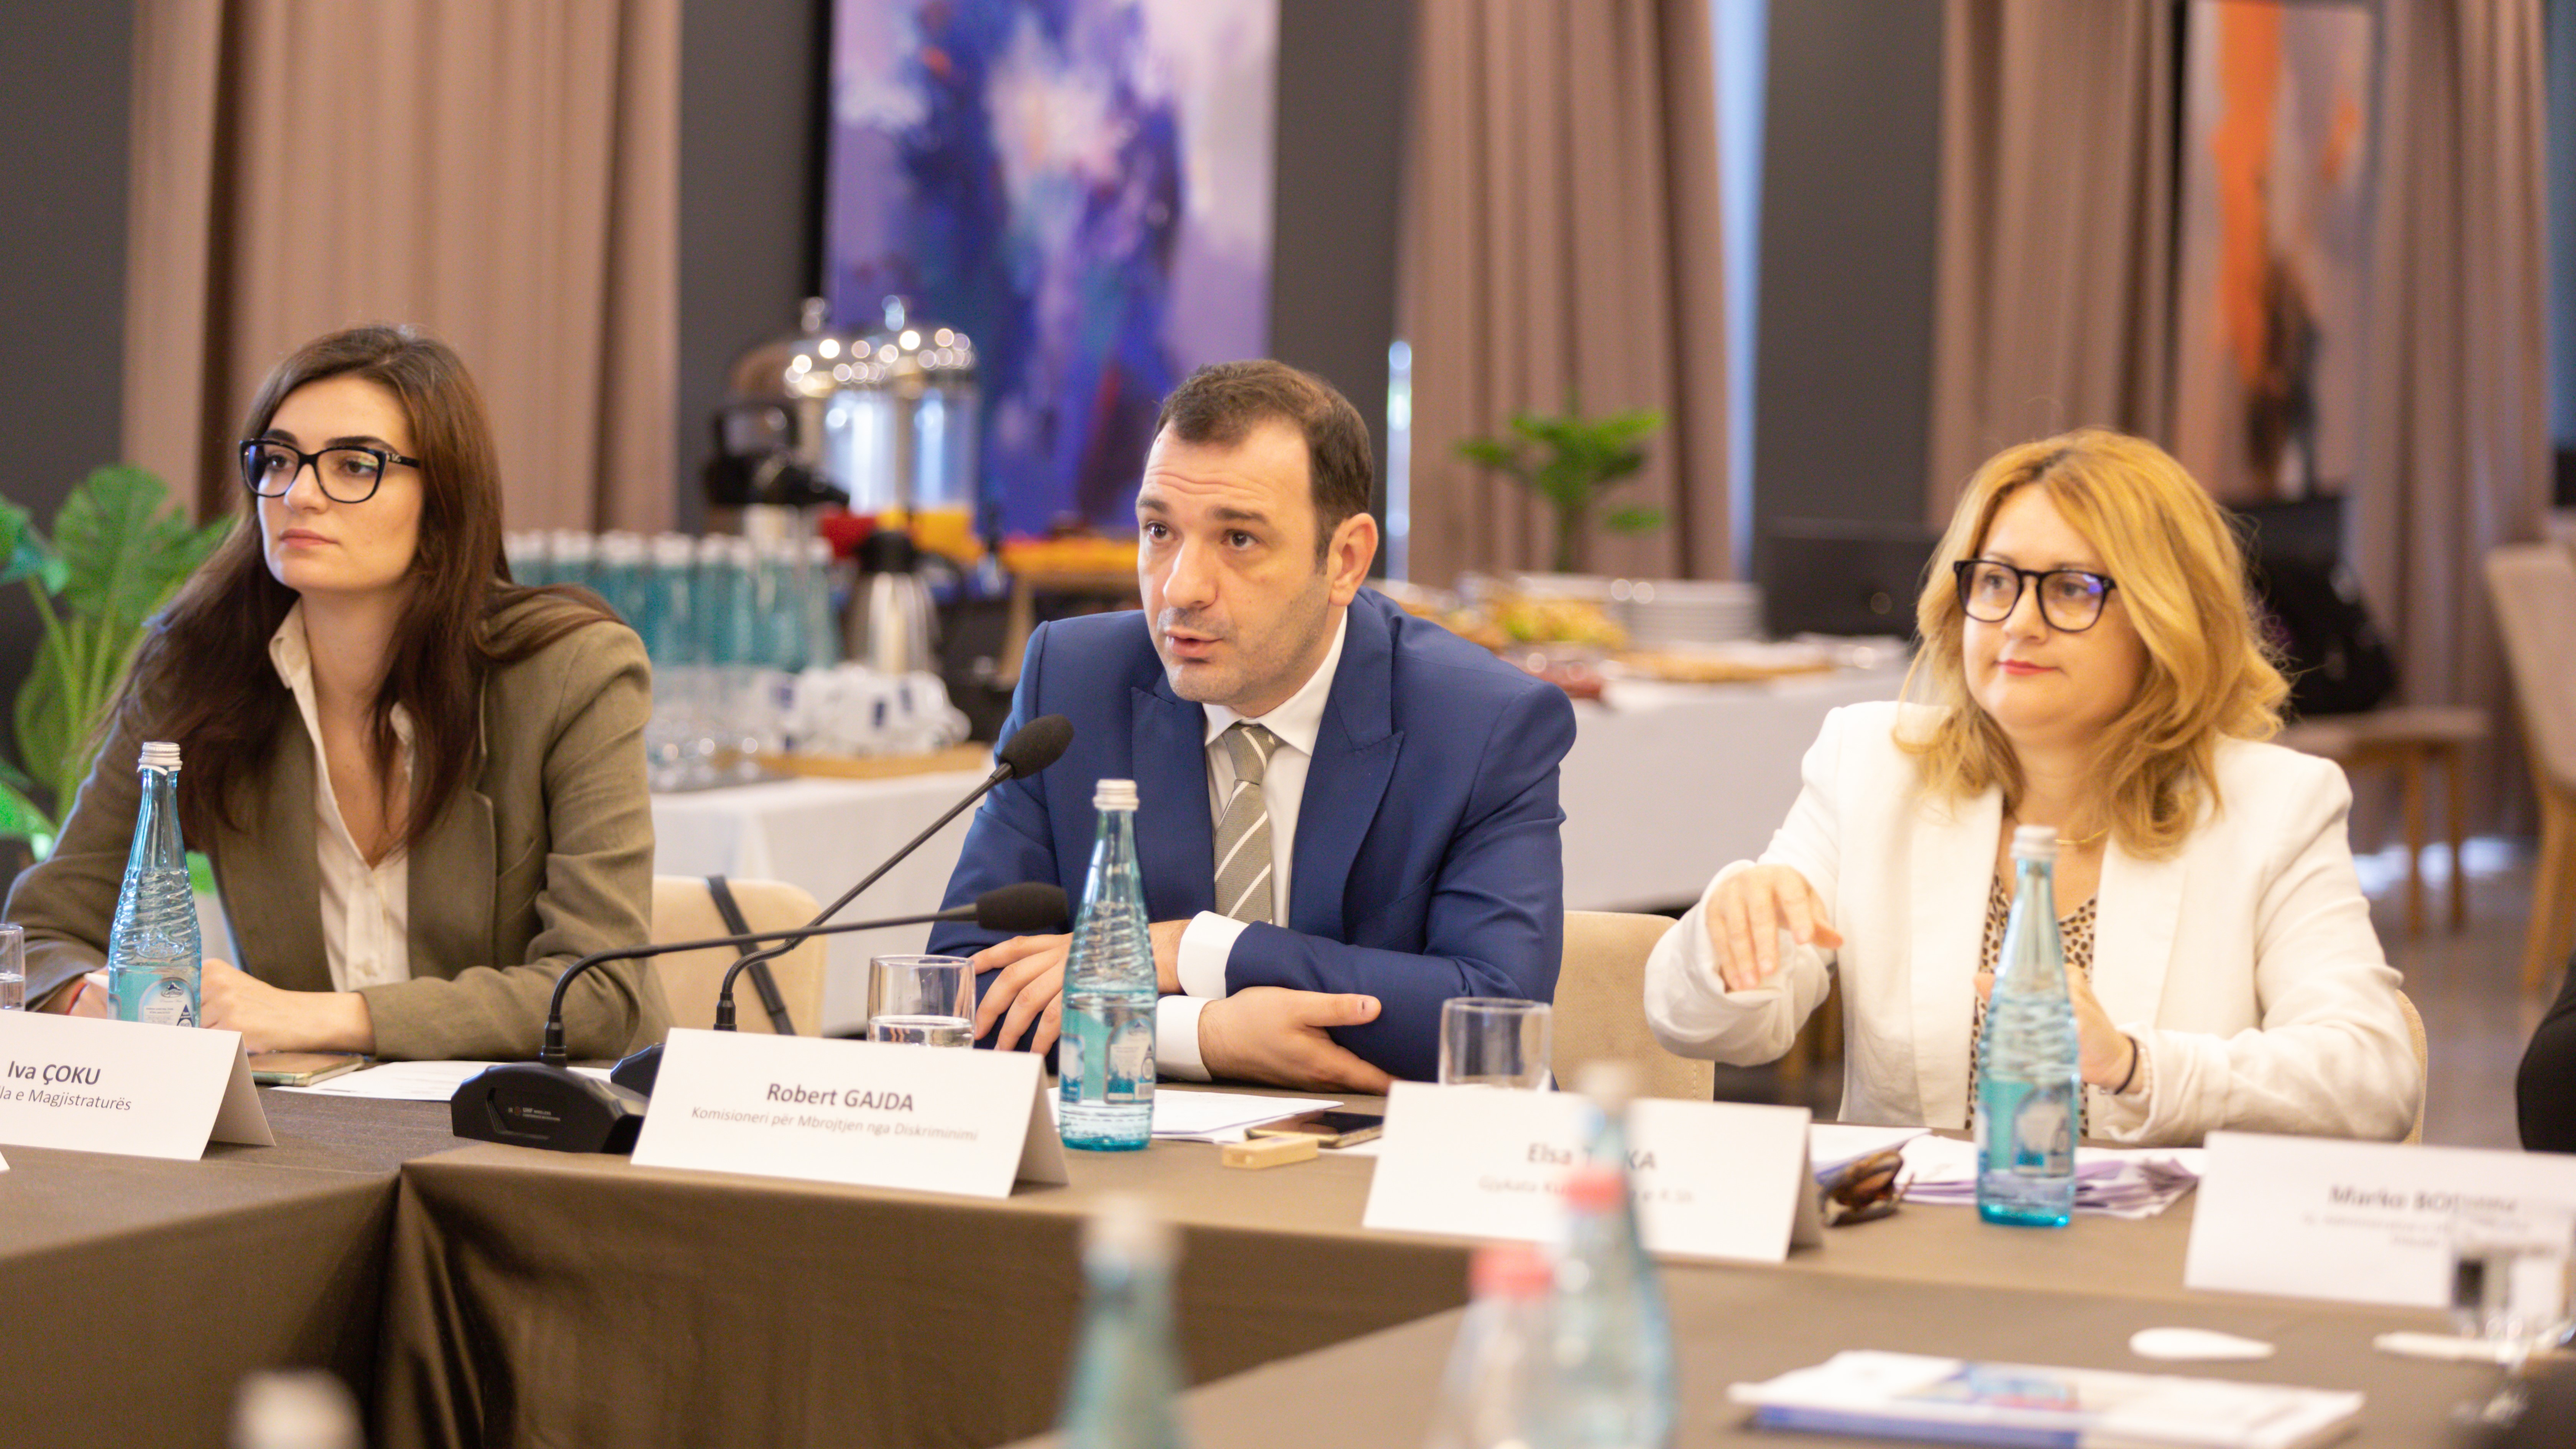 Albanian magistrates enhance their capacities on dealing with antidiscrimination and hate crimes’ cases